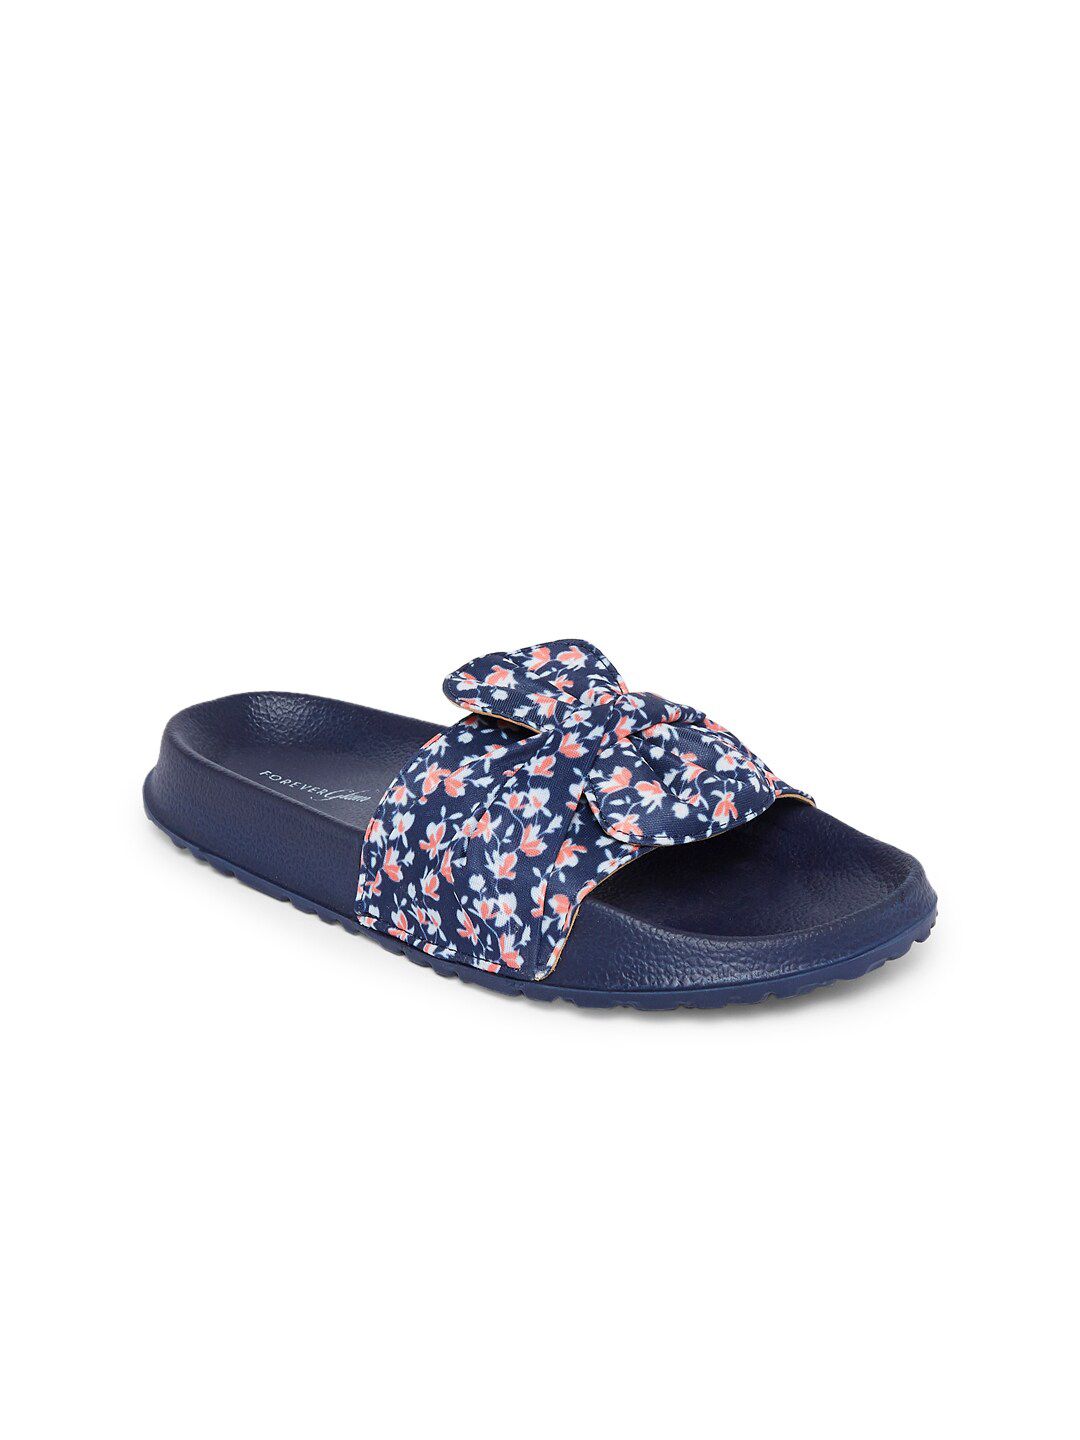 Forever Glam by Pantaloons Women Navy Blue & White Printed Sliders Price in India